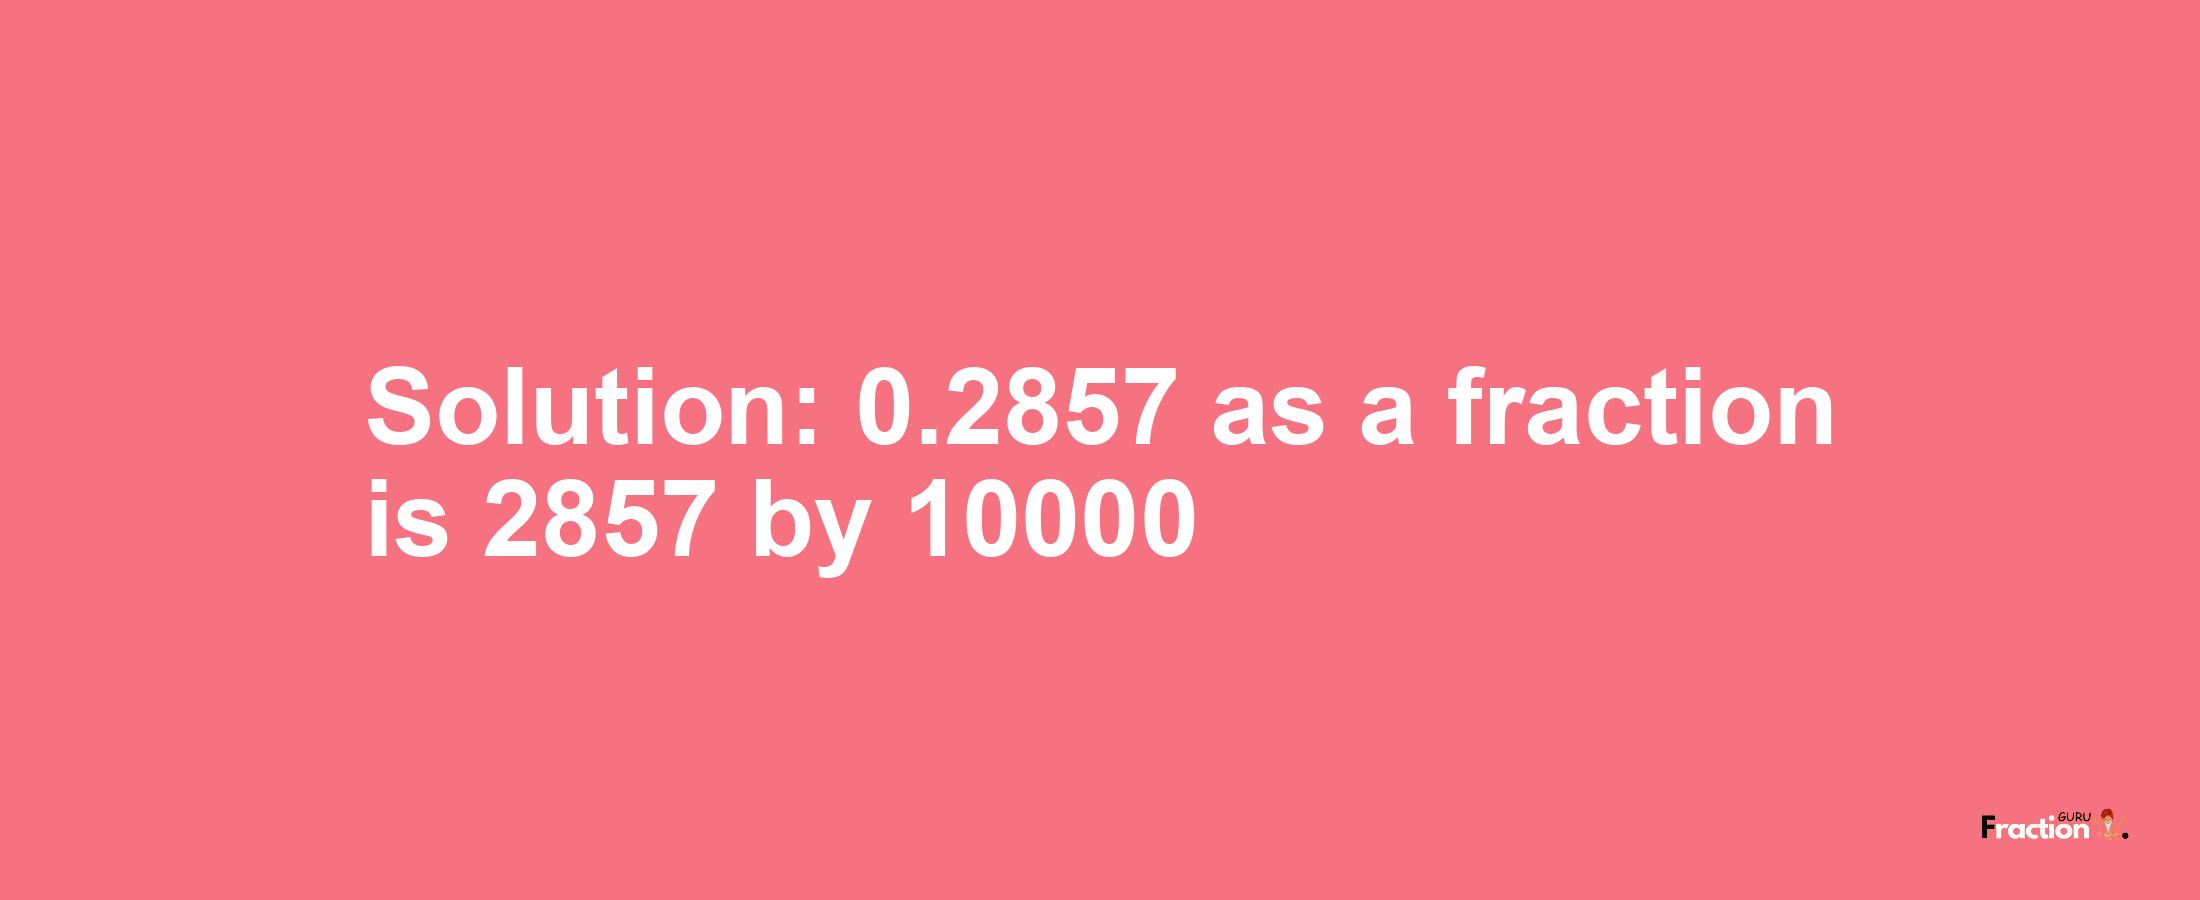 Solution:0.2857 as a fraction is 2857/10000